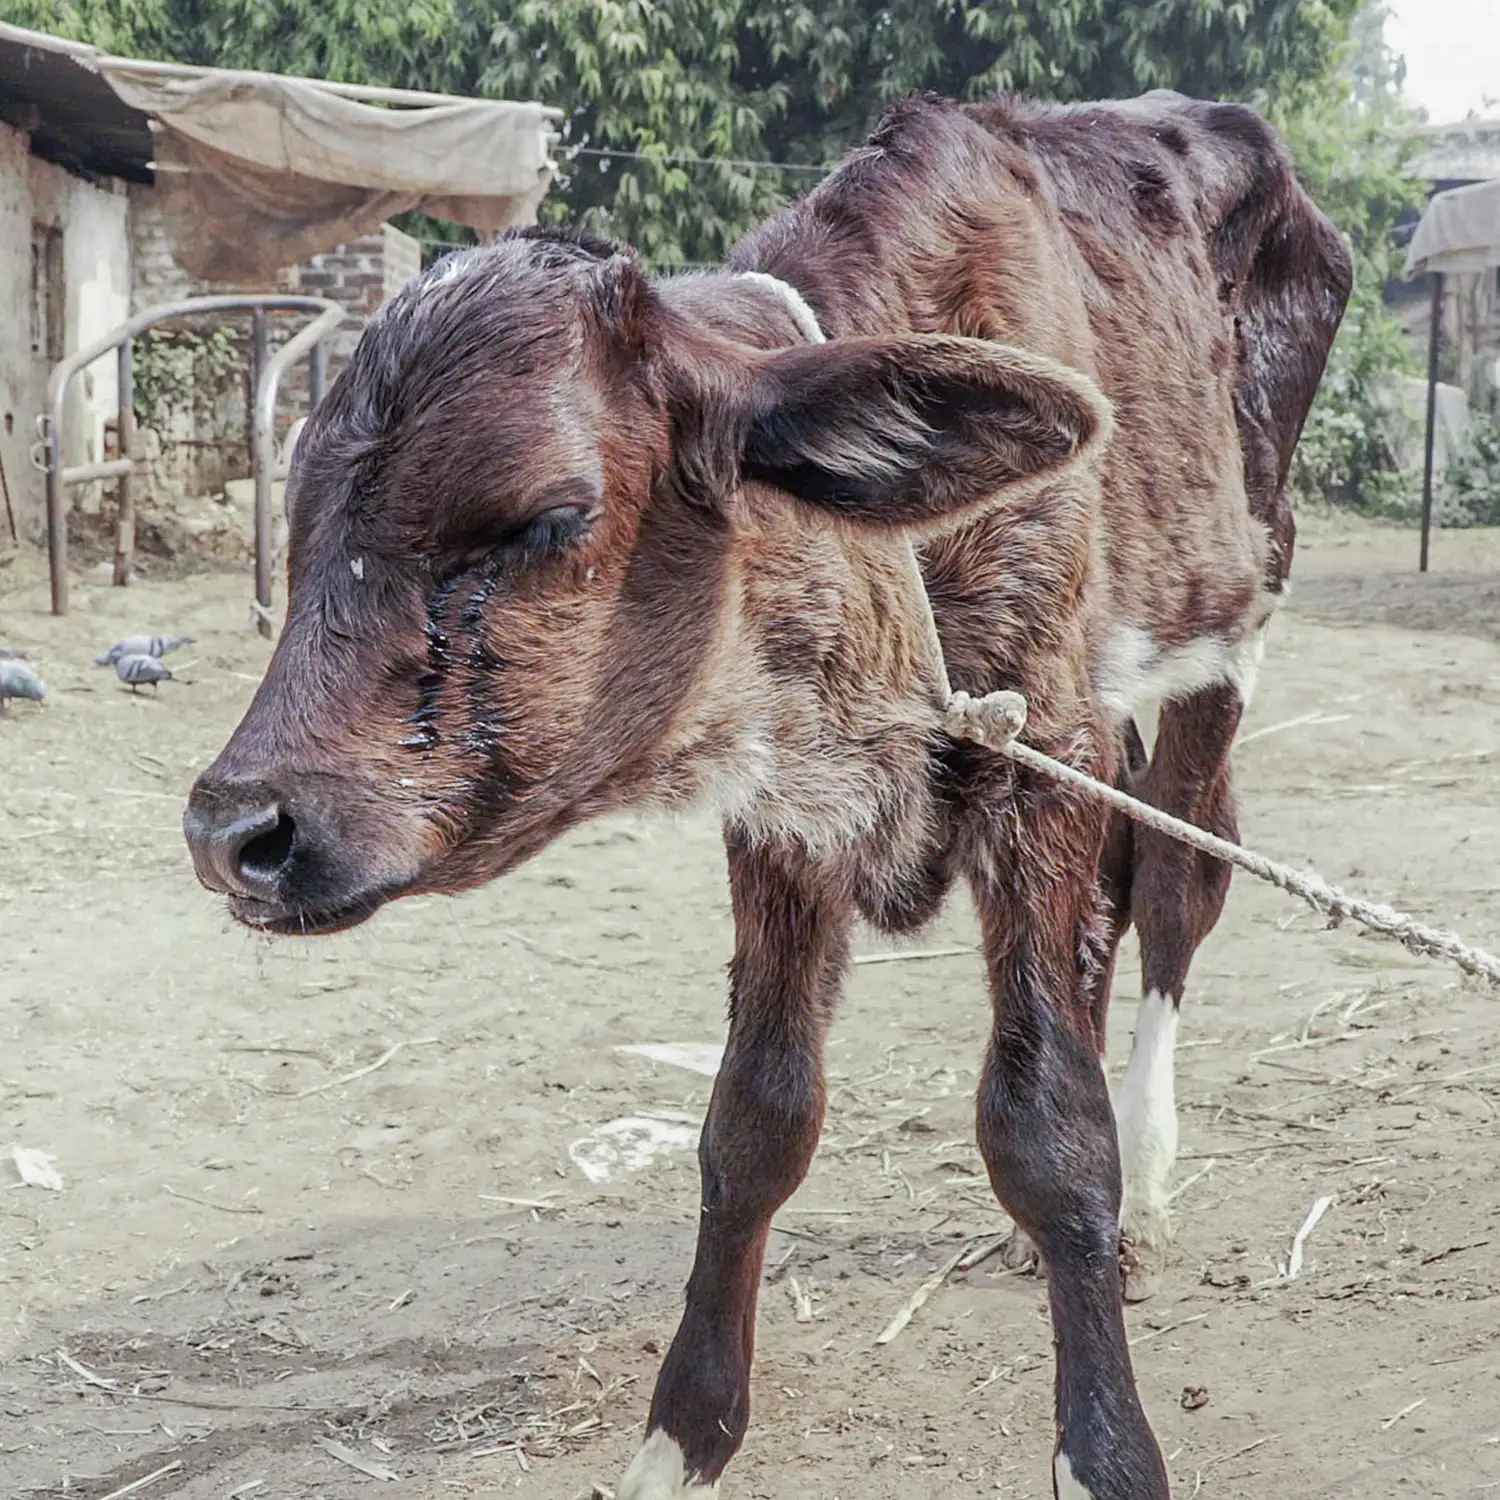 Male calf crying tied by the neck in an Indian dairy farm